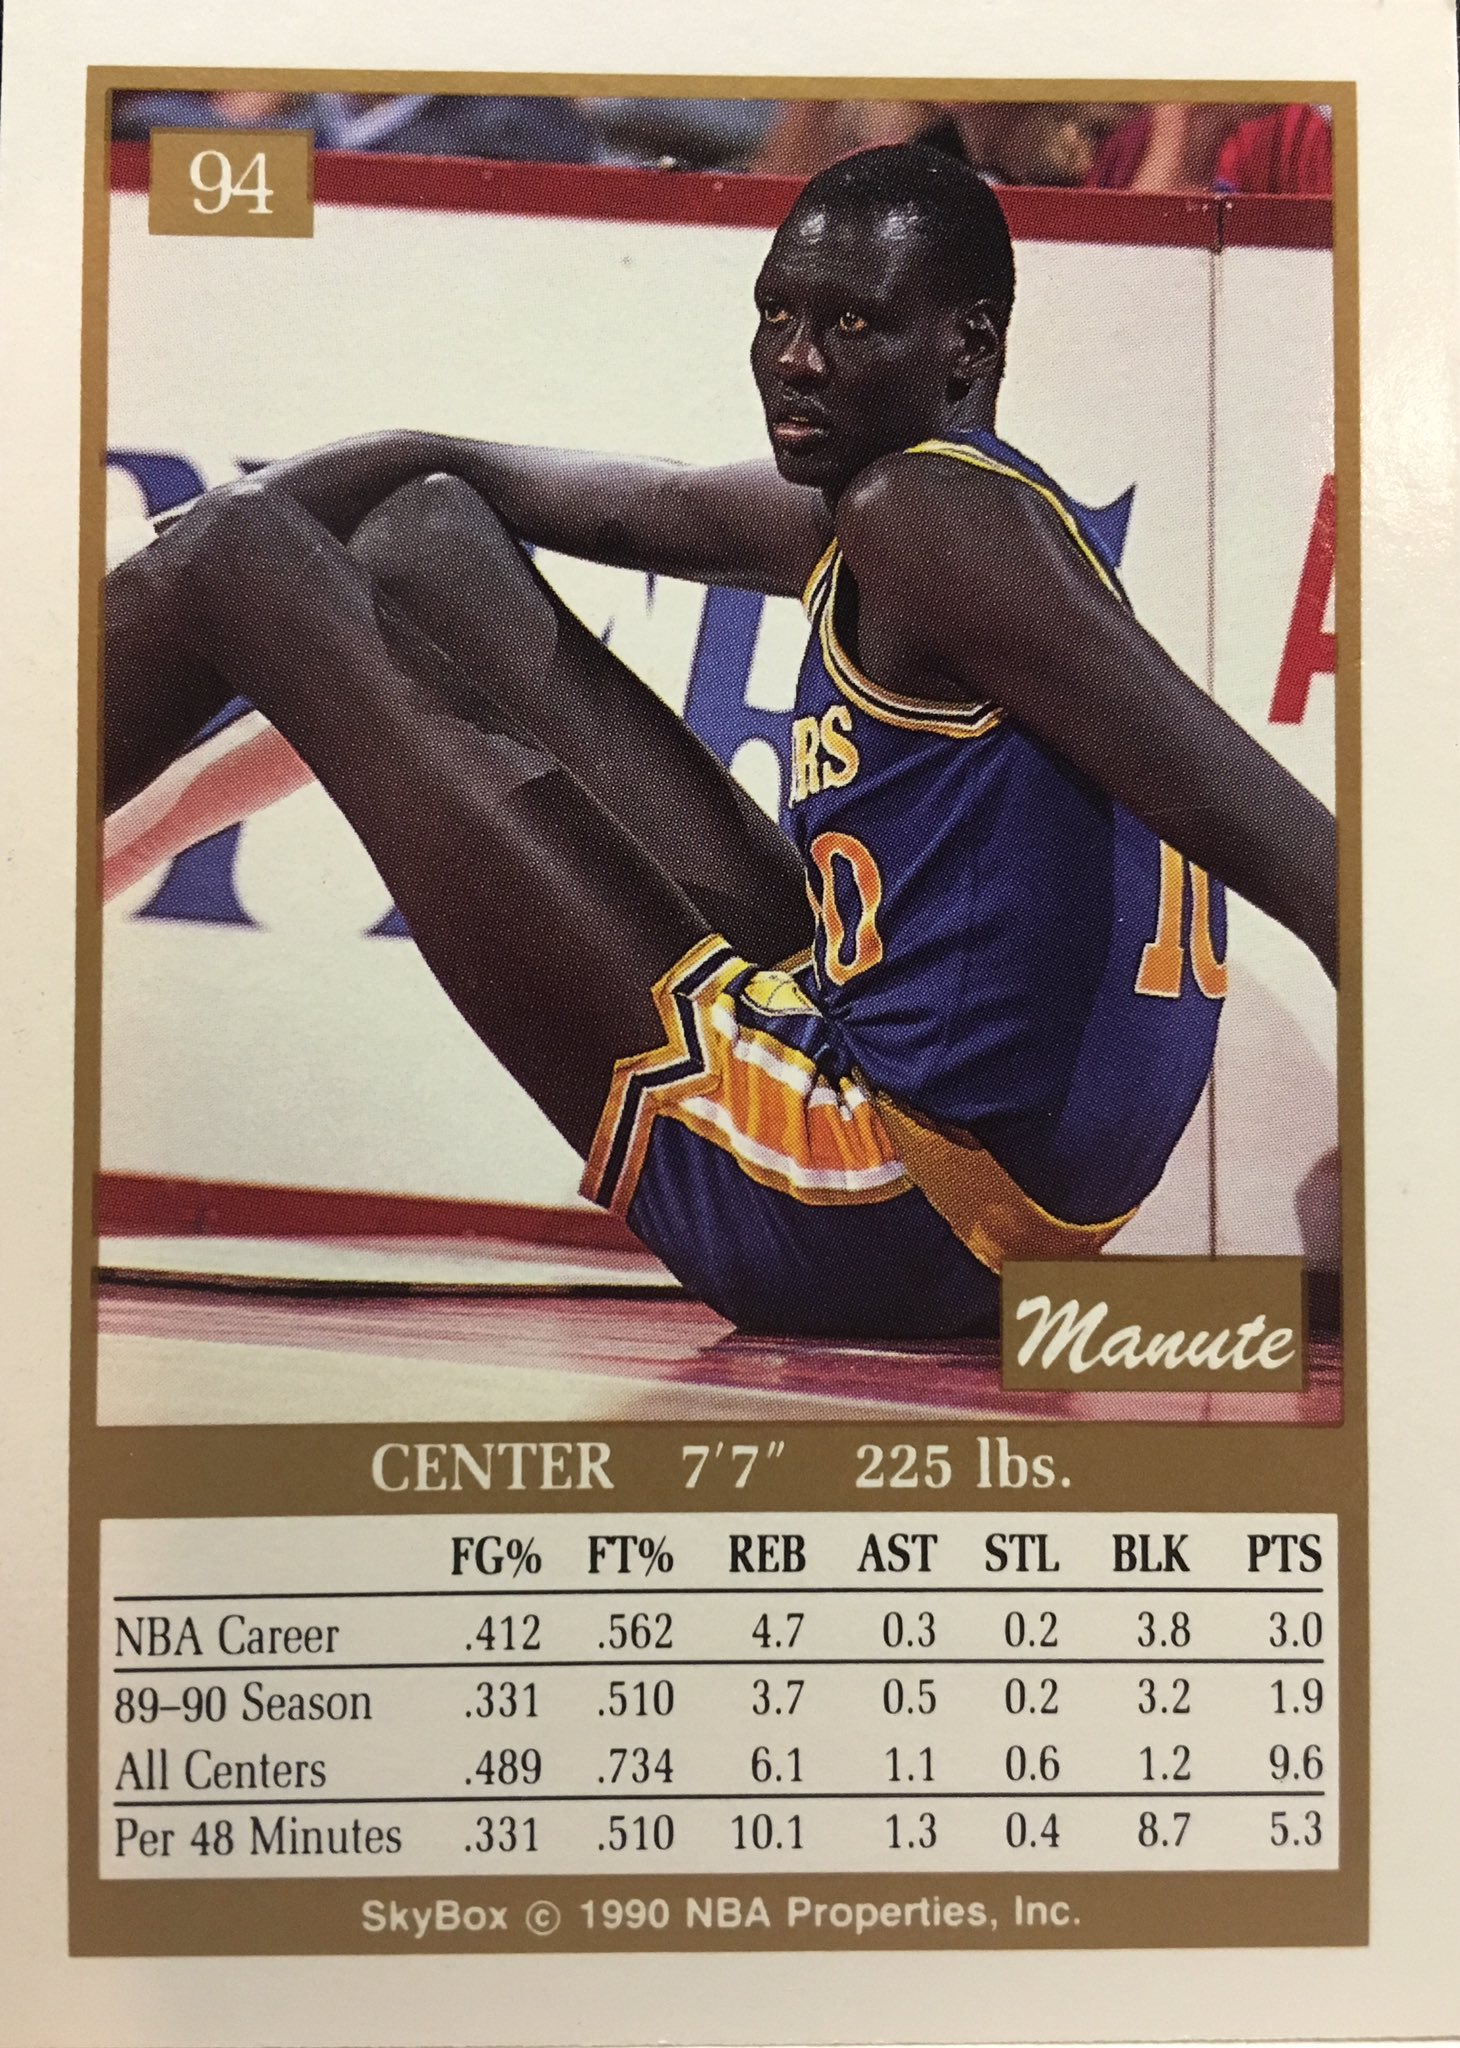 Remembering Manute Bol: difficult task of following legend